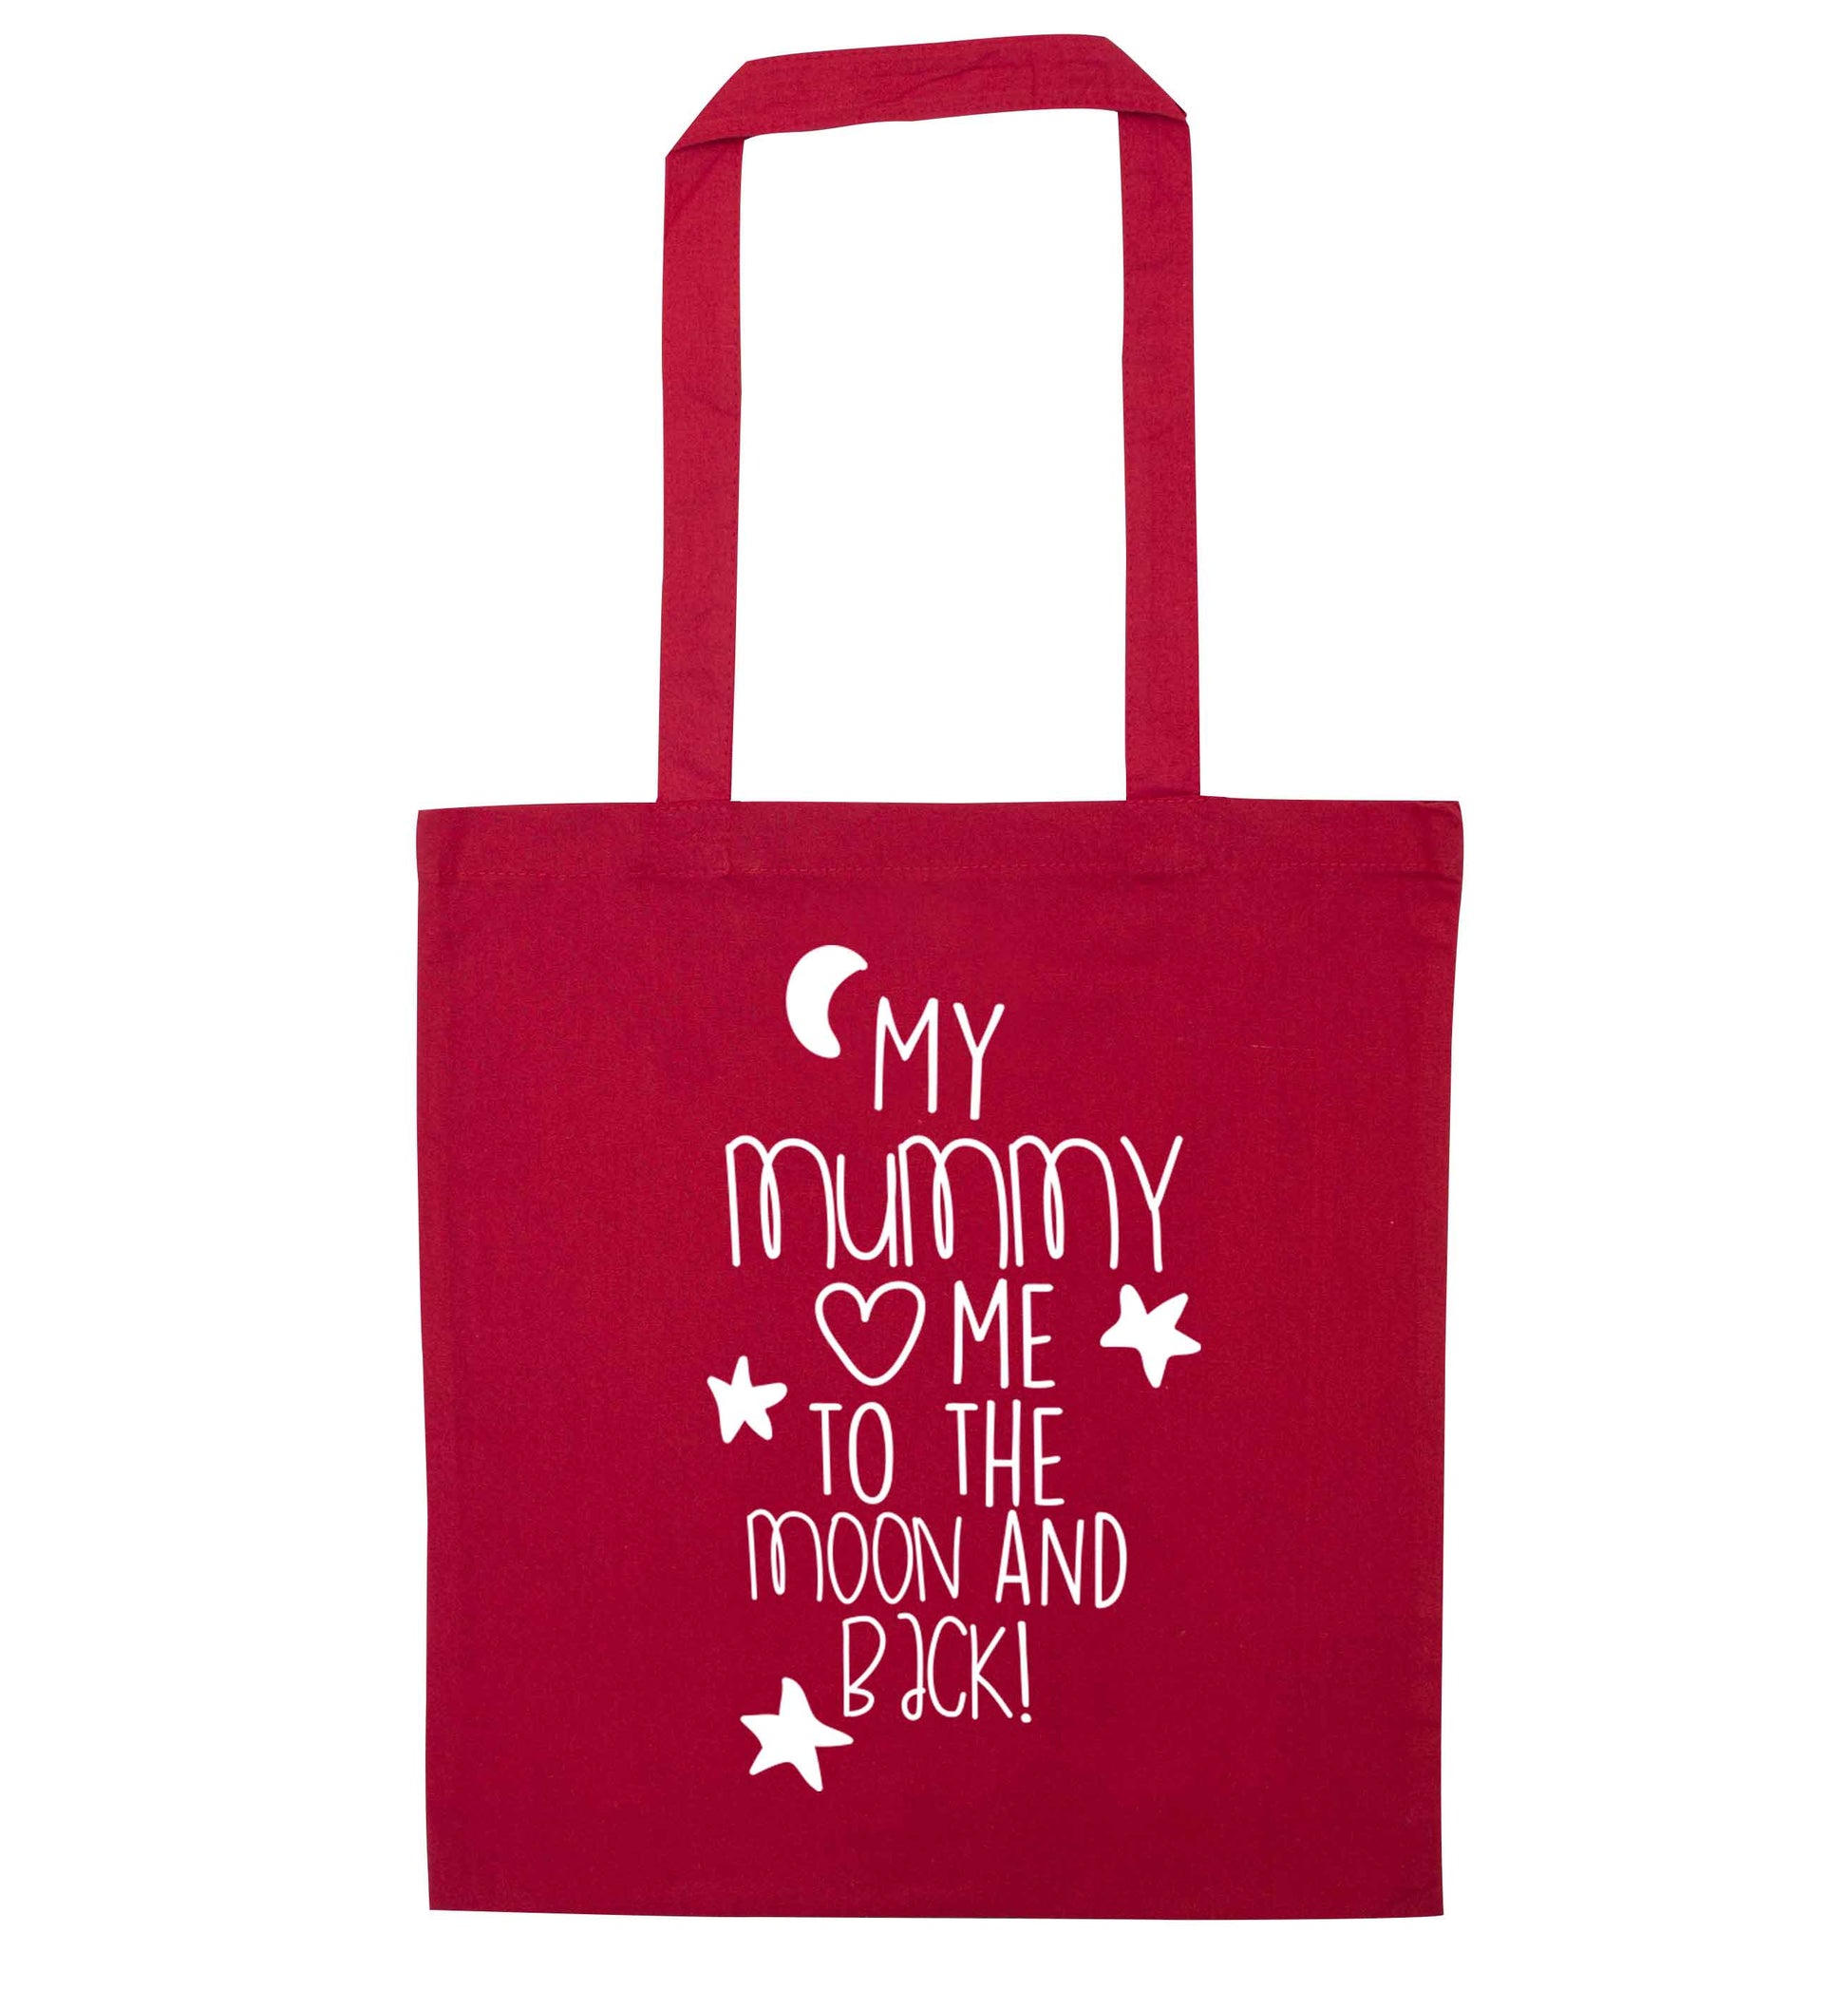 My mum loves me to the moon and back red tote bag